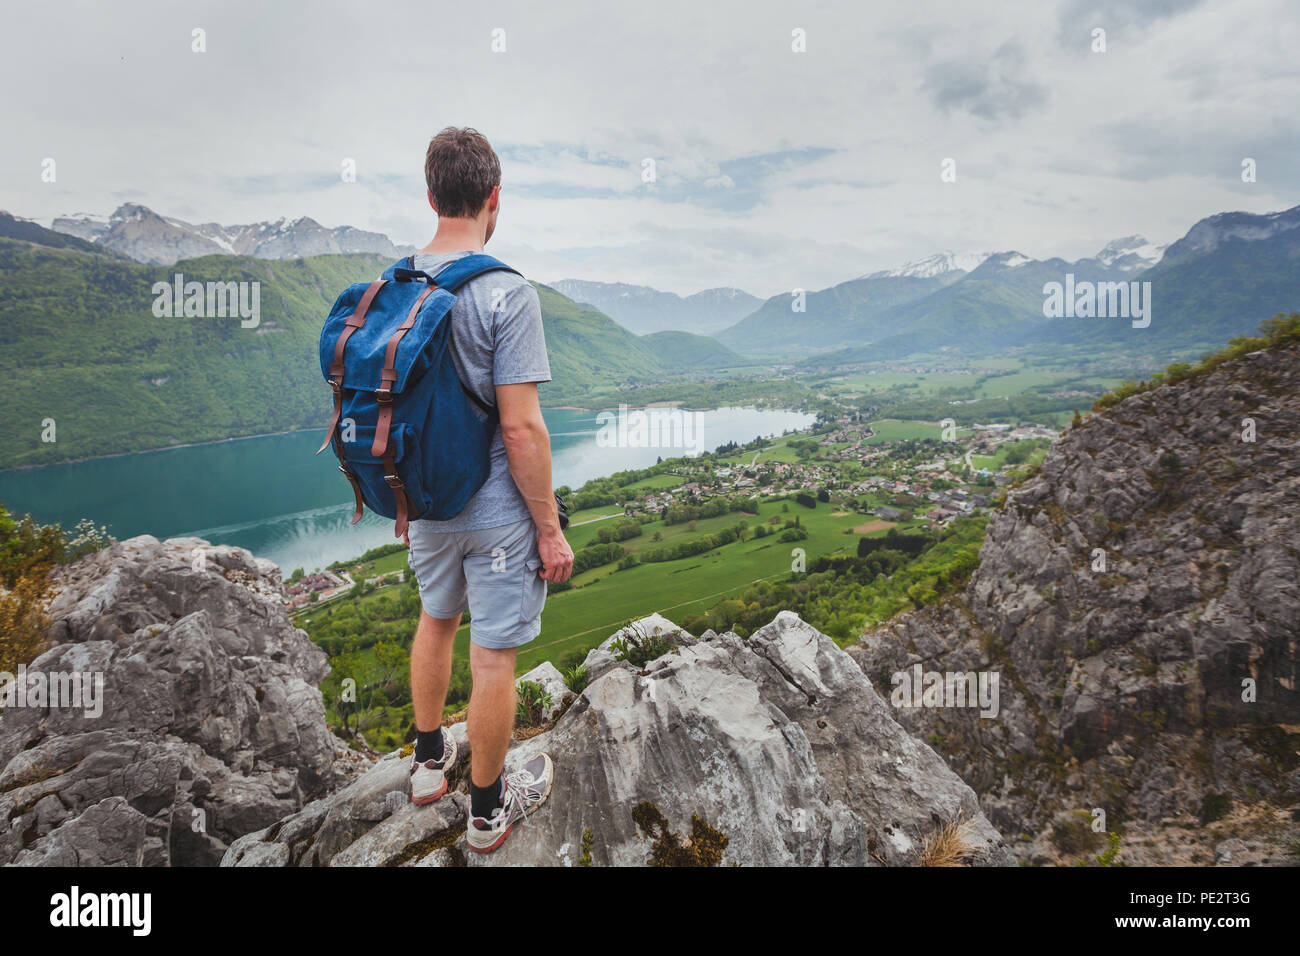 hiking in mountains, achievement concept, summer outdoors leisure activity, hiker with backpack enjoying the view of valley and lake Stock Photo